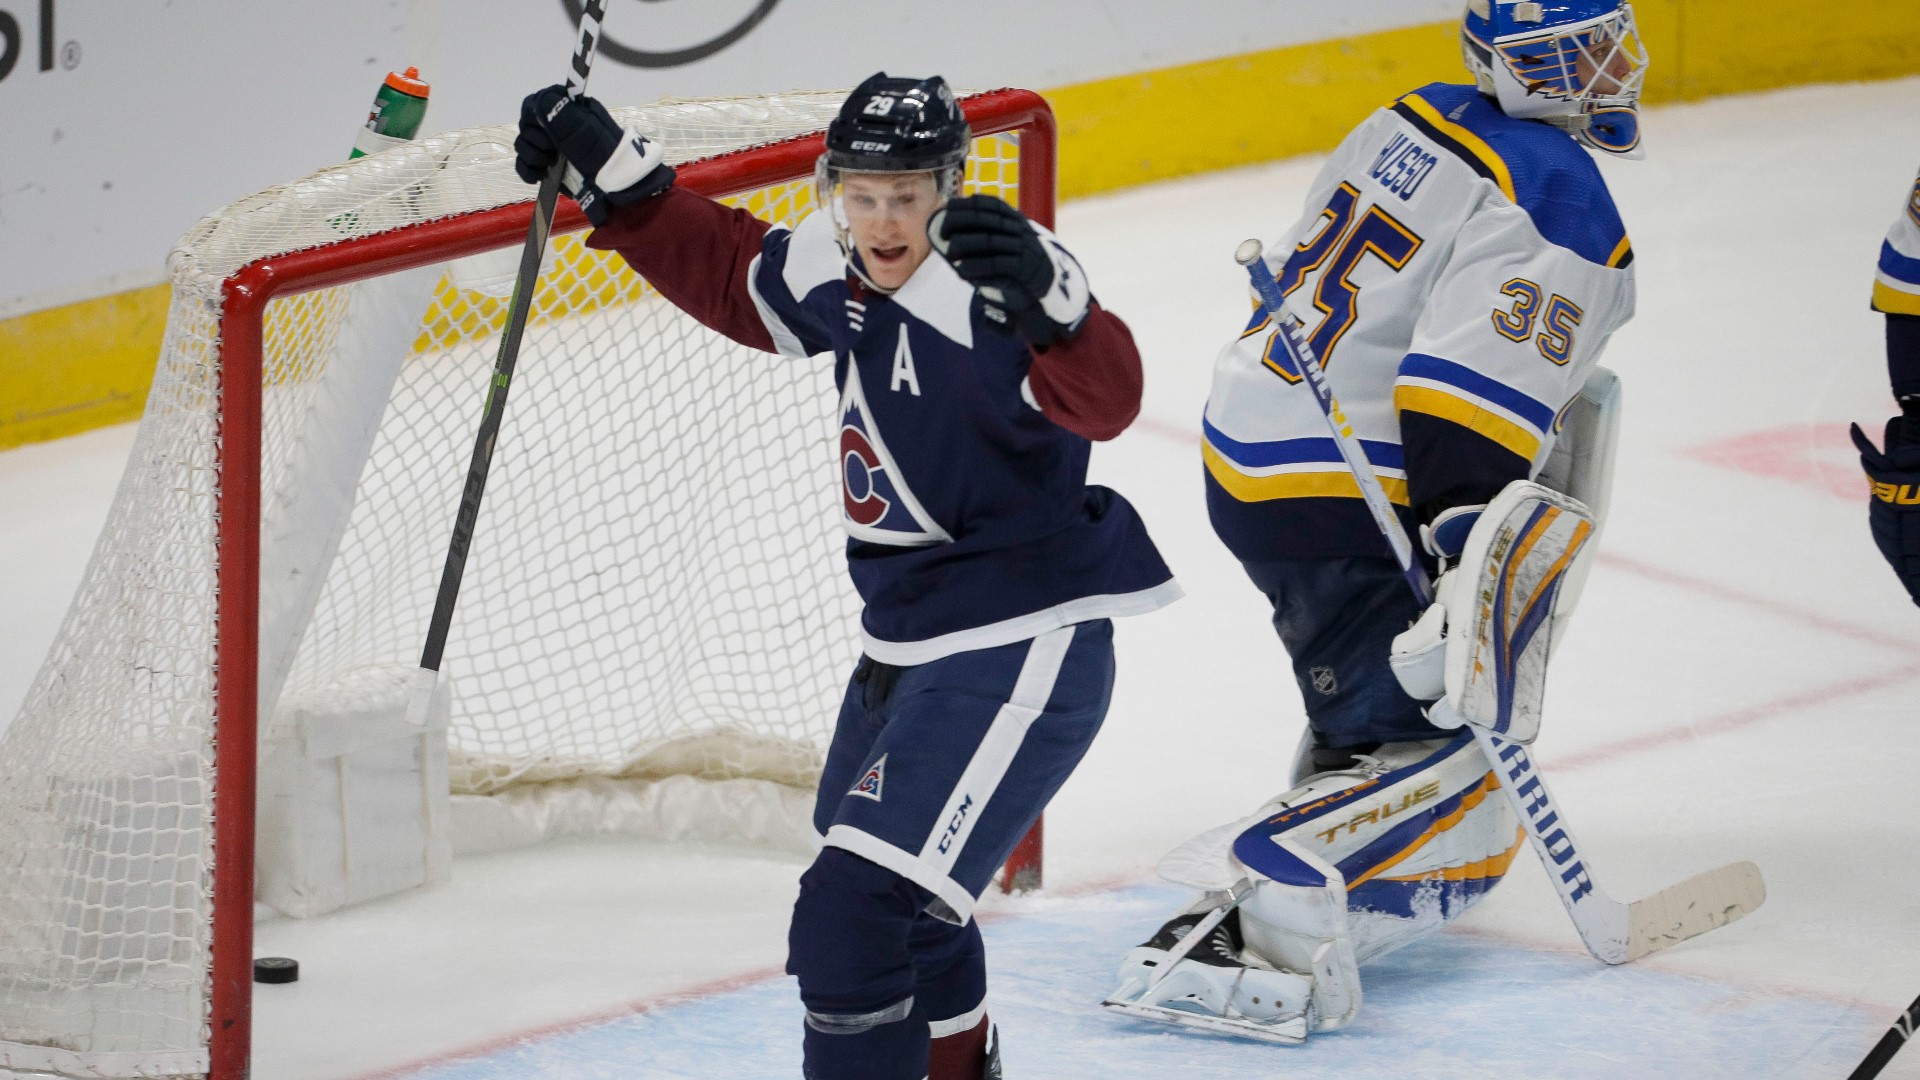 Nathan MacKinnon added to his impressive postseason numbers with two goals and an assist in Game 1 vs. St. Louis.